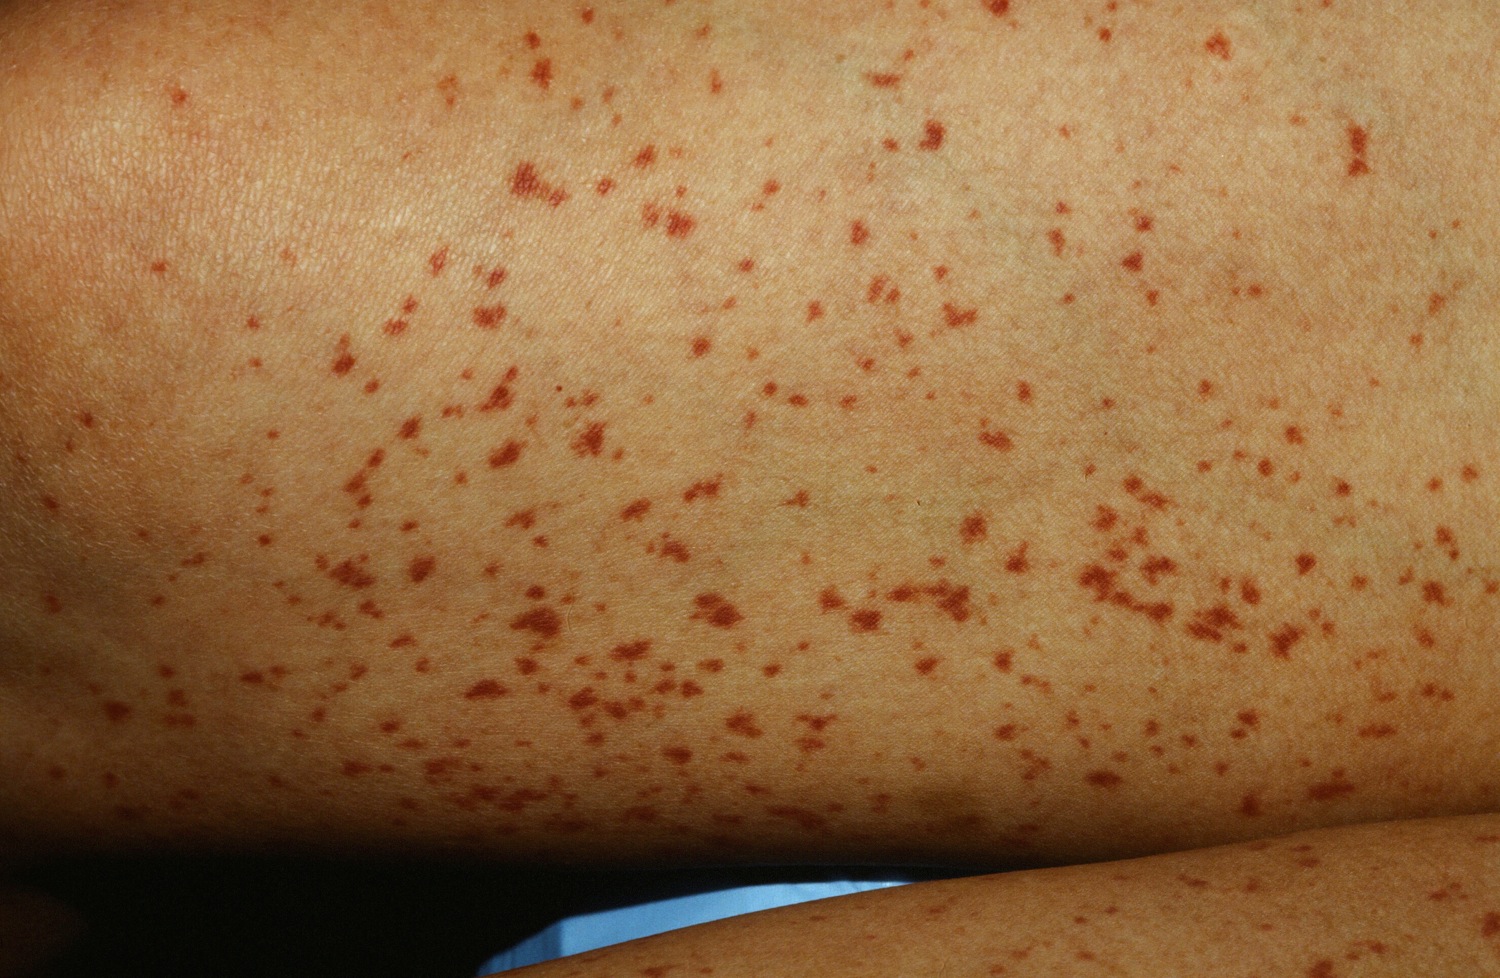 colchicine pinpoint red spots on skin